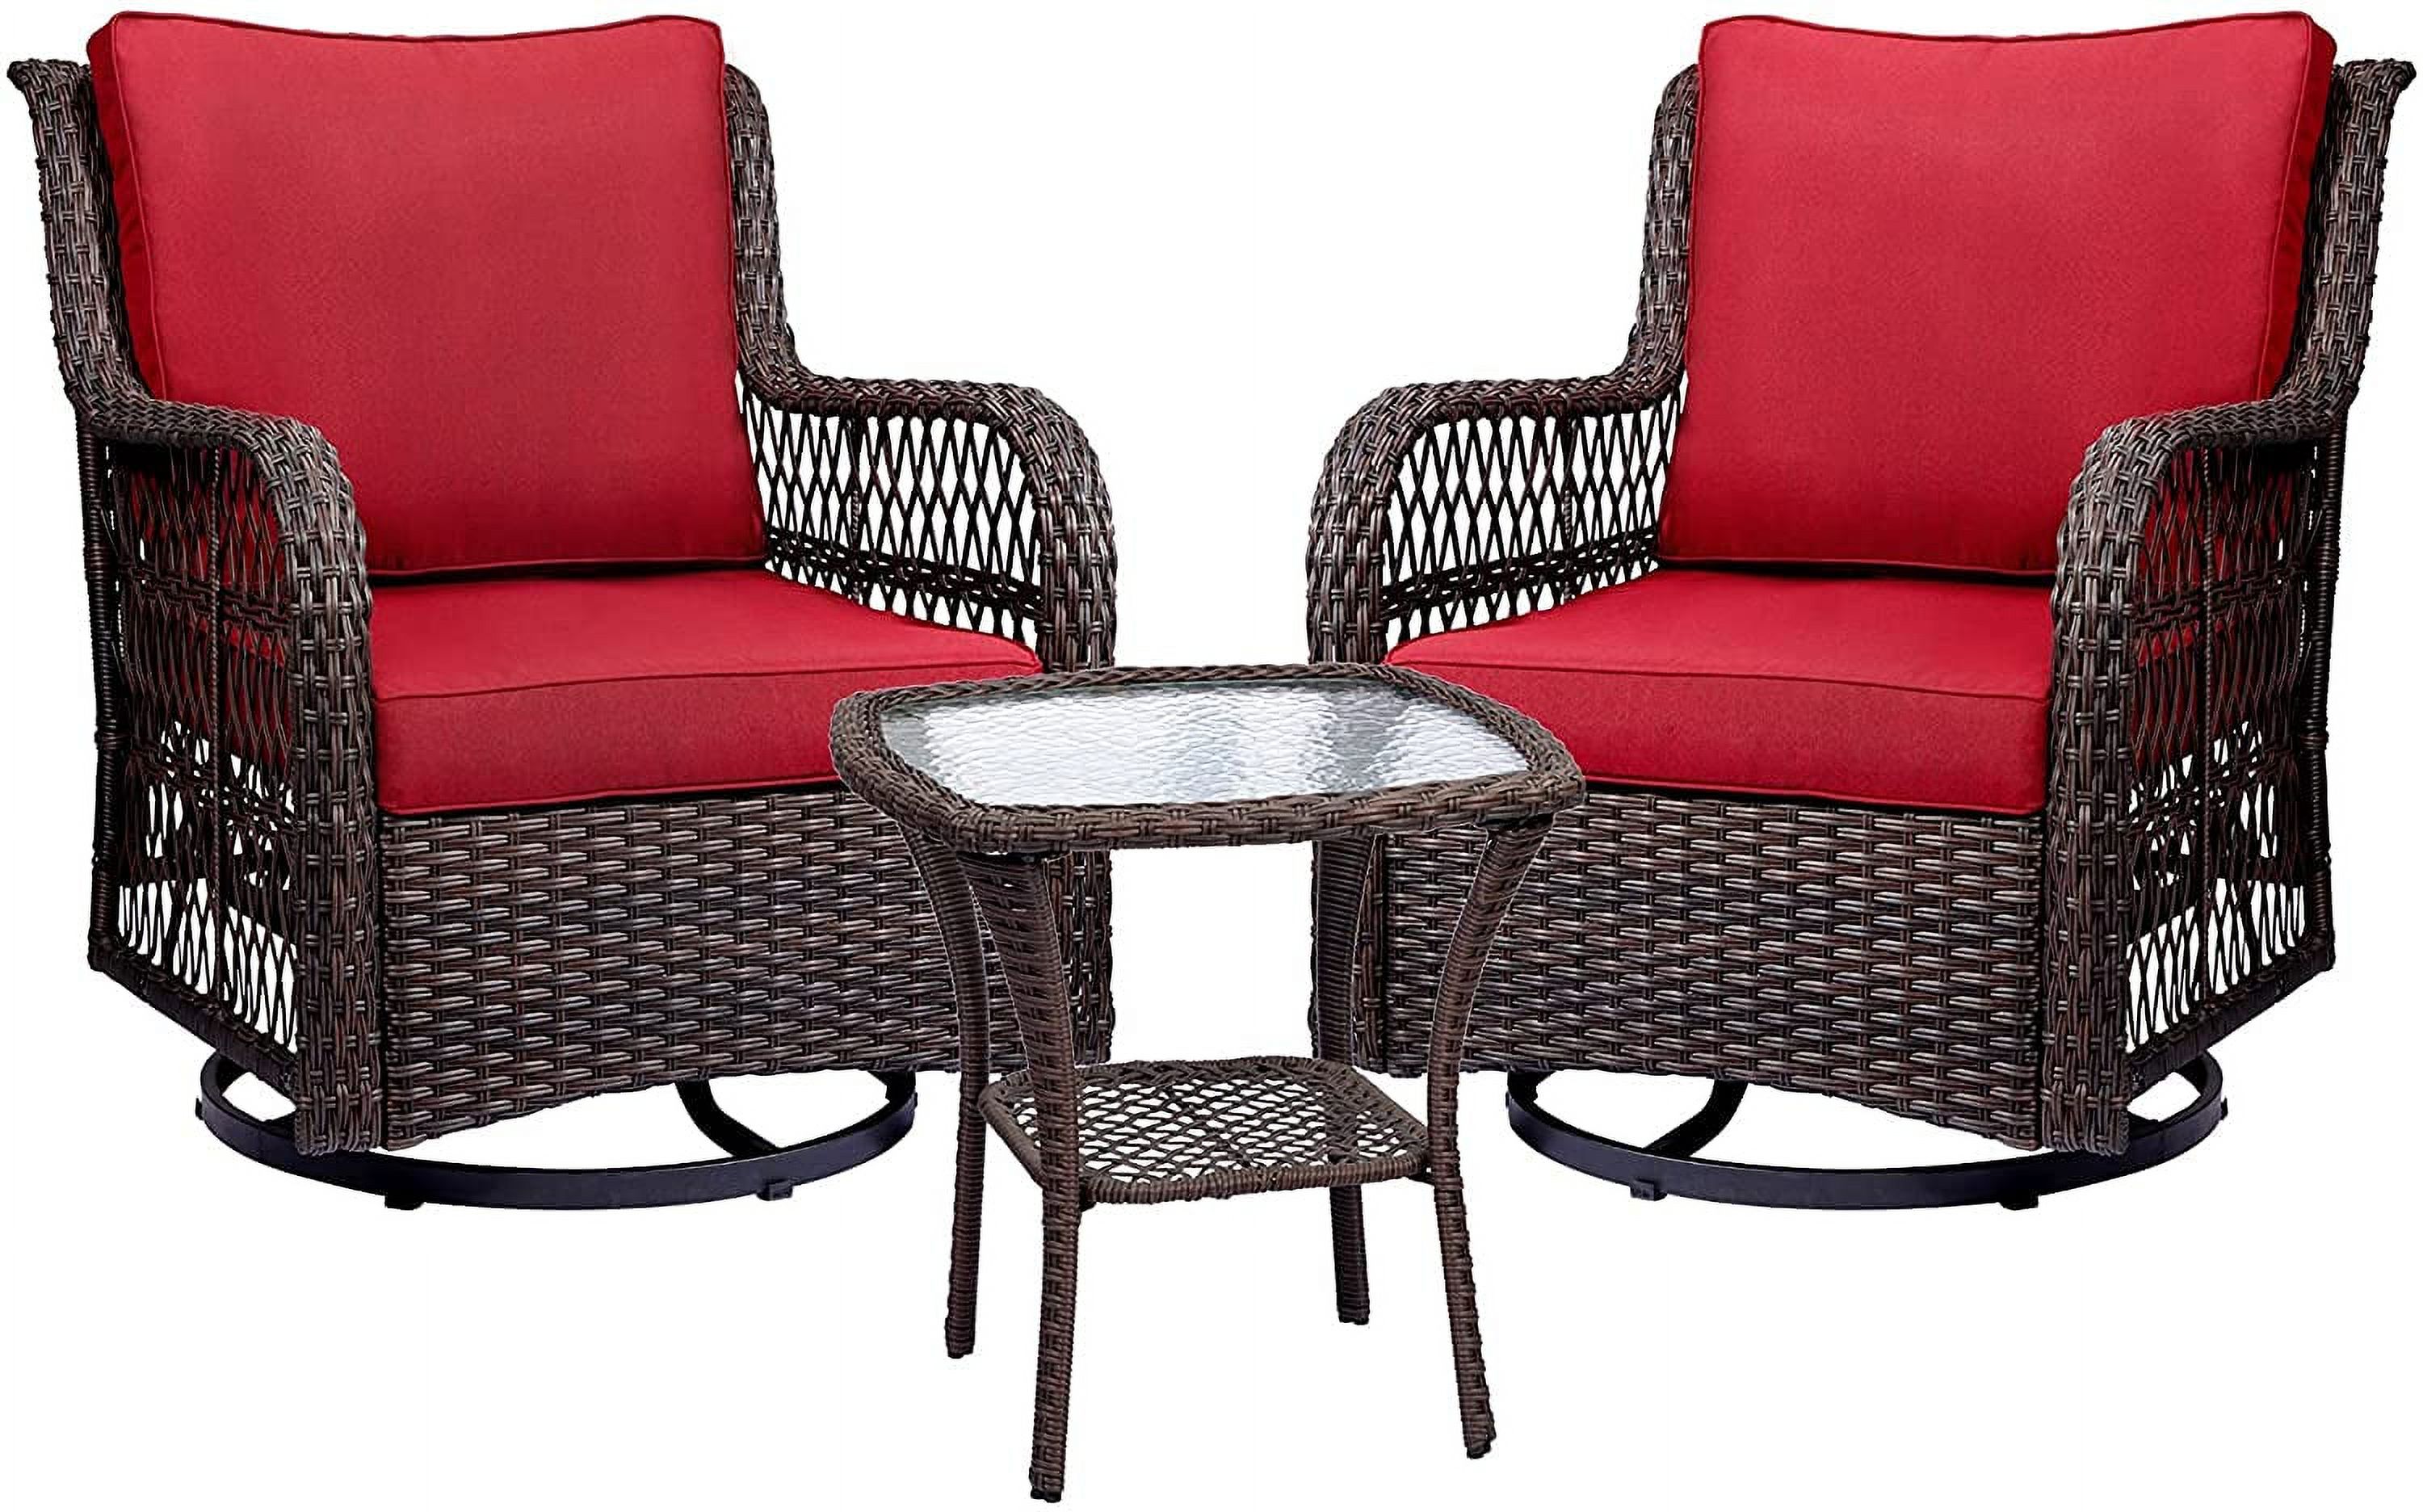 Outdoor Wicker Swivel Rocker Patio Set,360 Degree Swivel Rocking Chairs Elegant Wicker Patio Bistro Set with Premuim Cushions and Armored Glass Top Side Table for Backyard - image 1 of 7